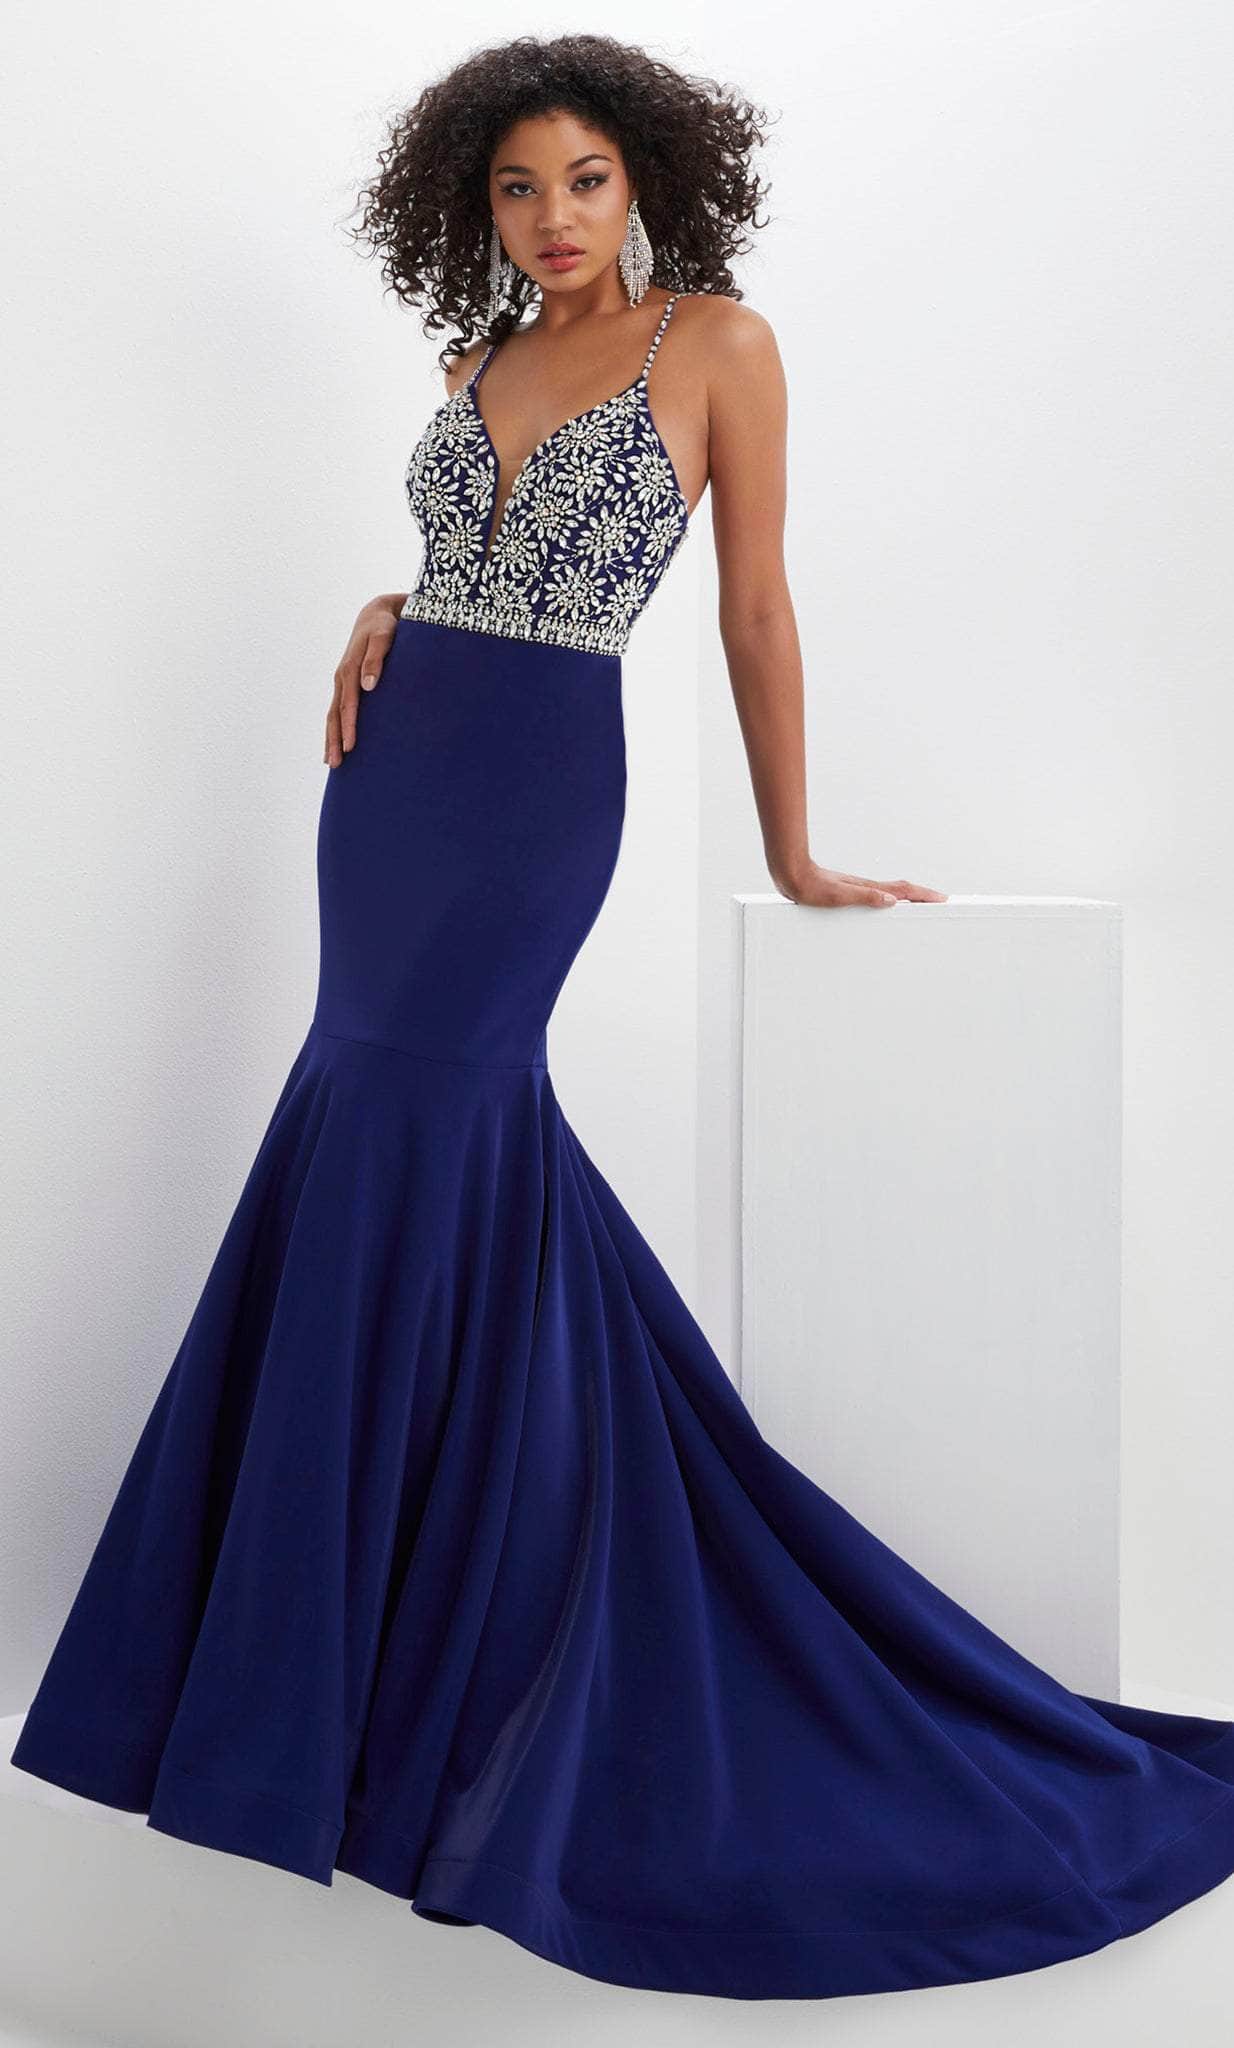 Image of Panoply 14133 - Beaded Plunging Sweetheart Evening Gown